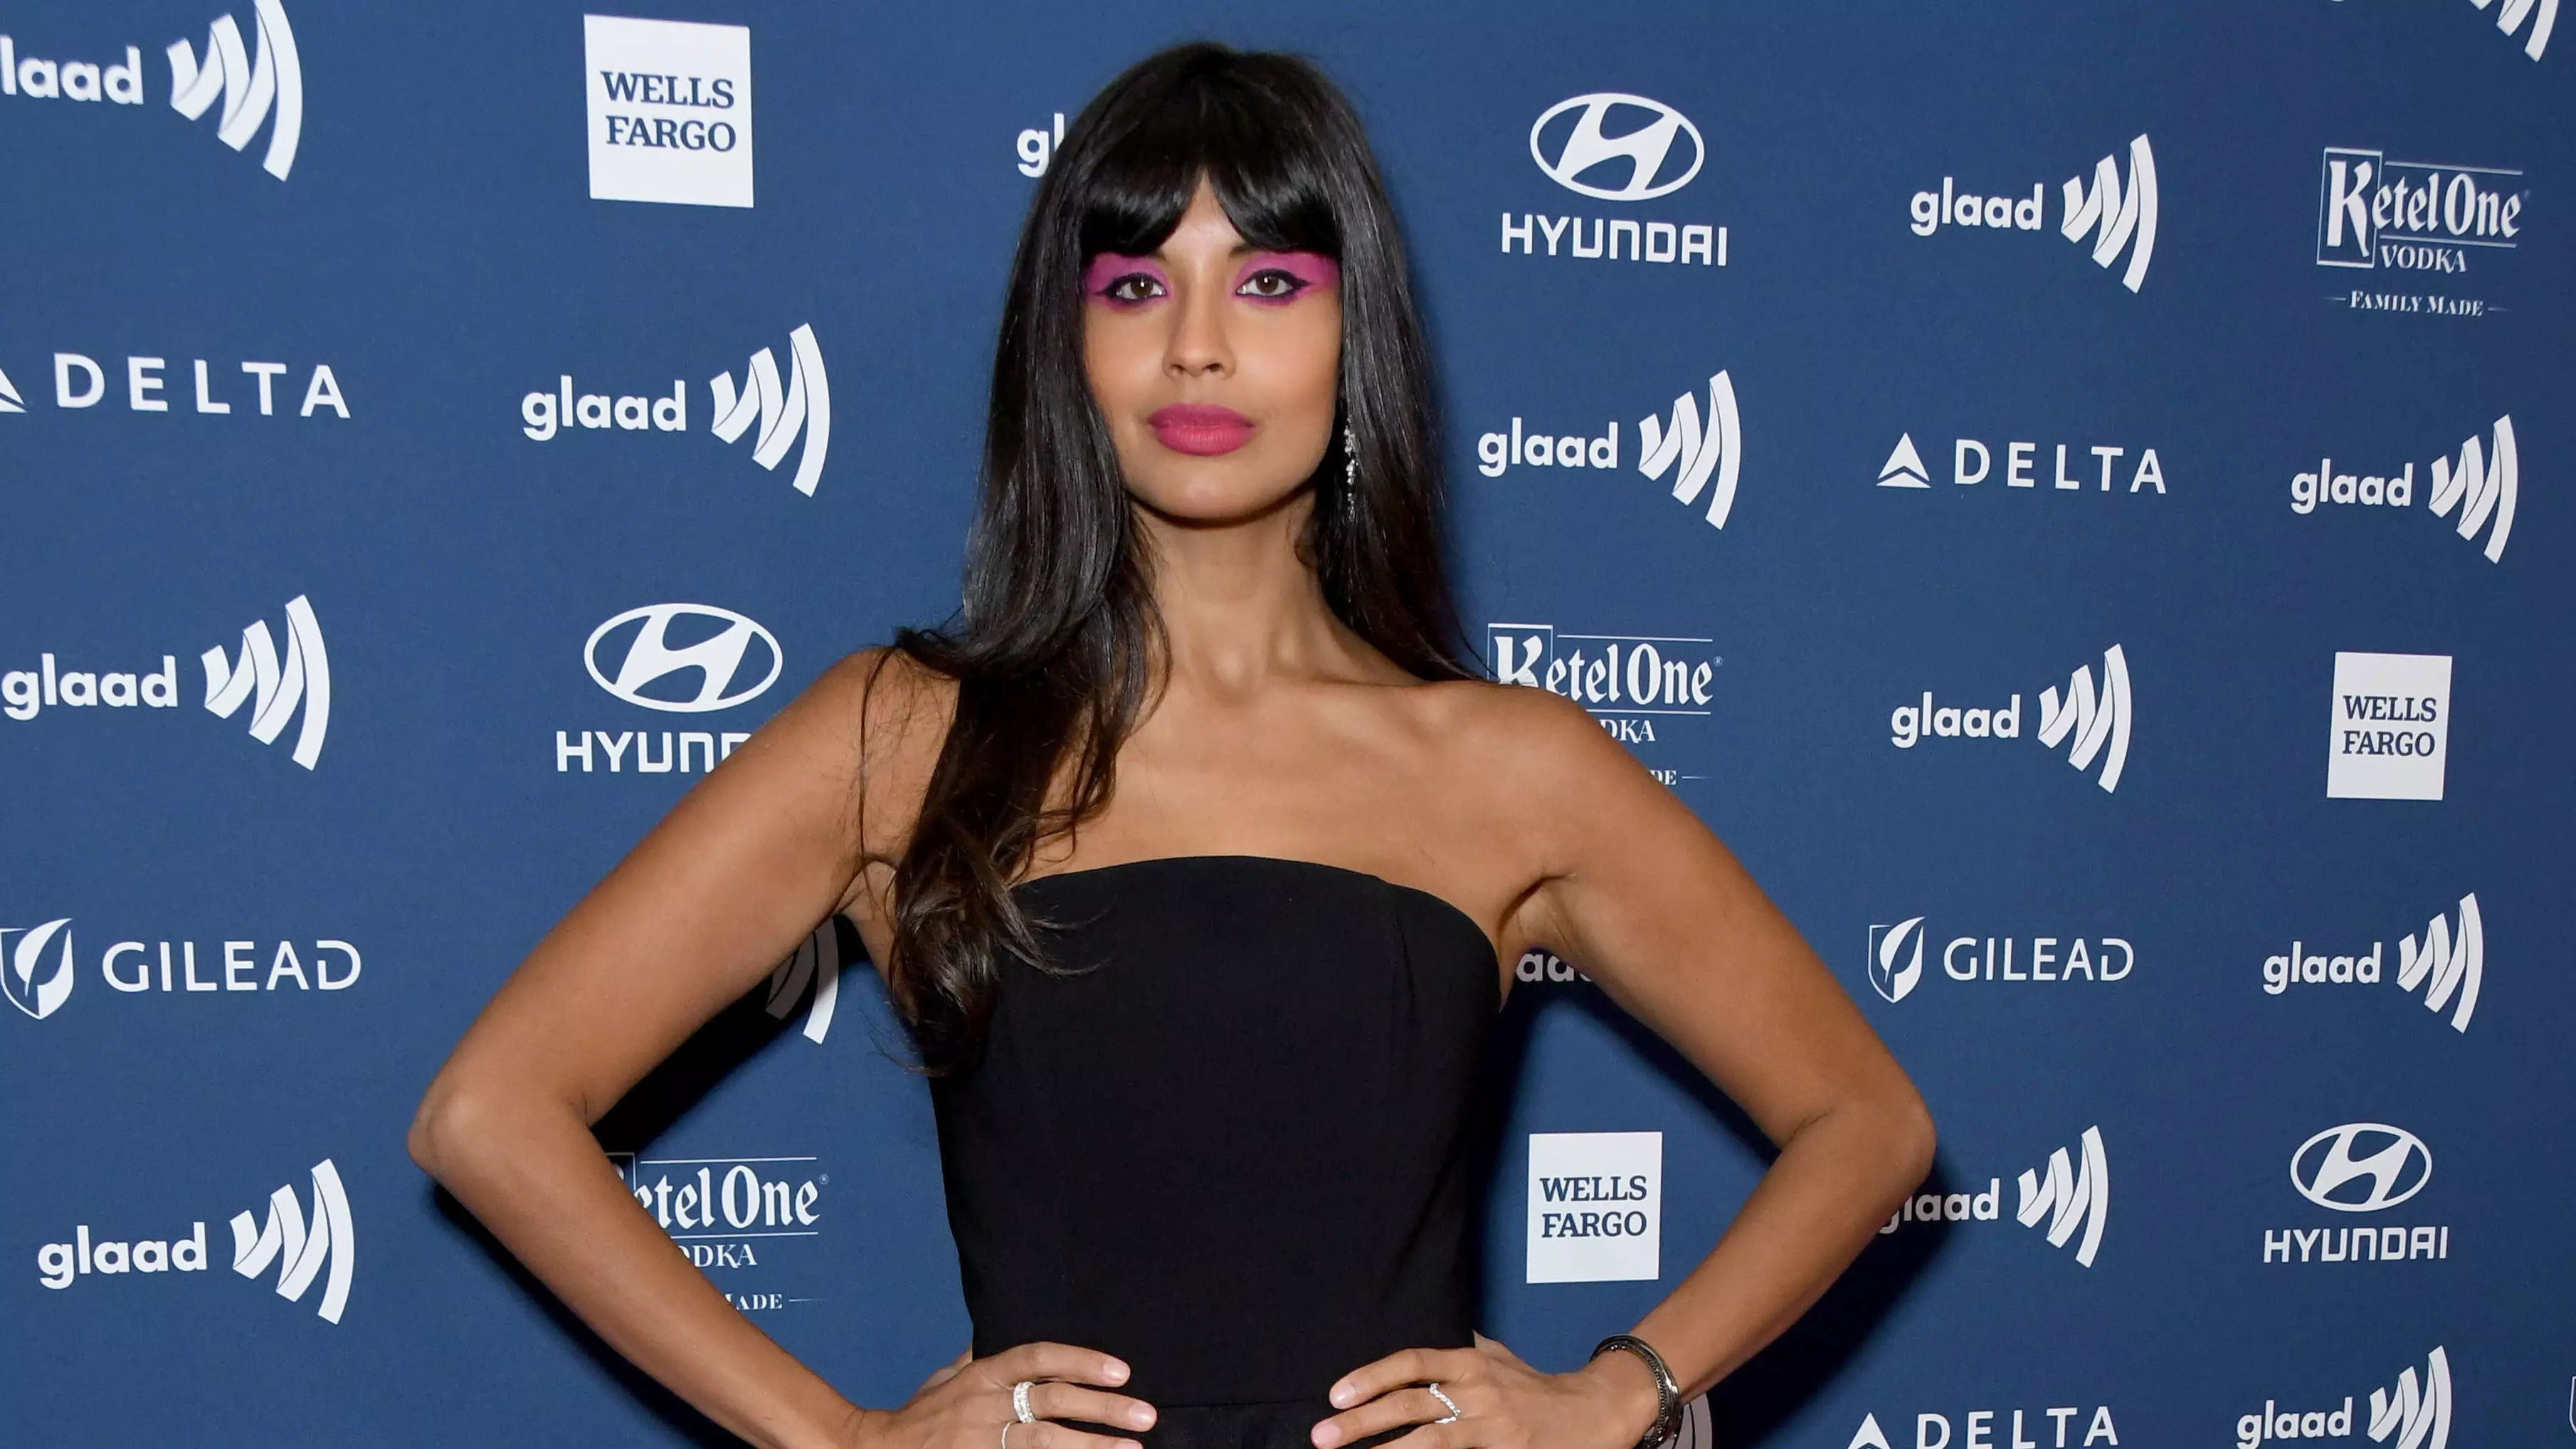 Jameela Jamil Reveals Having An Abortion Was 'Best Decision' She Ever Made